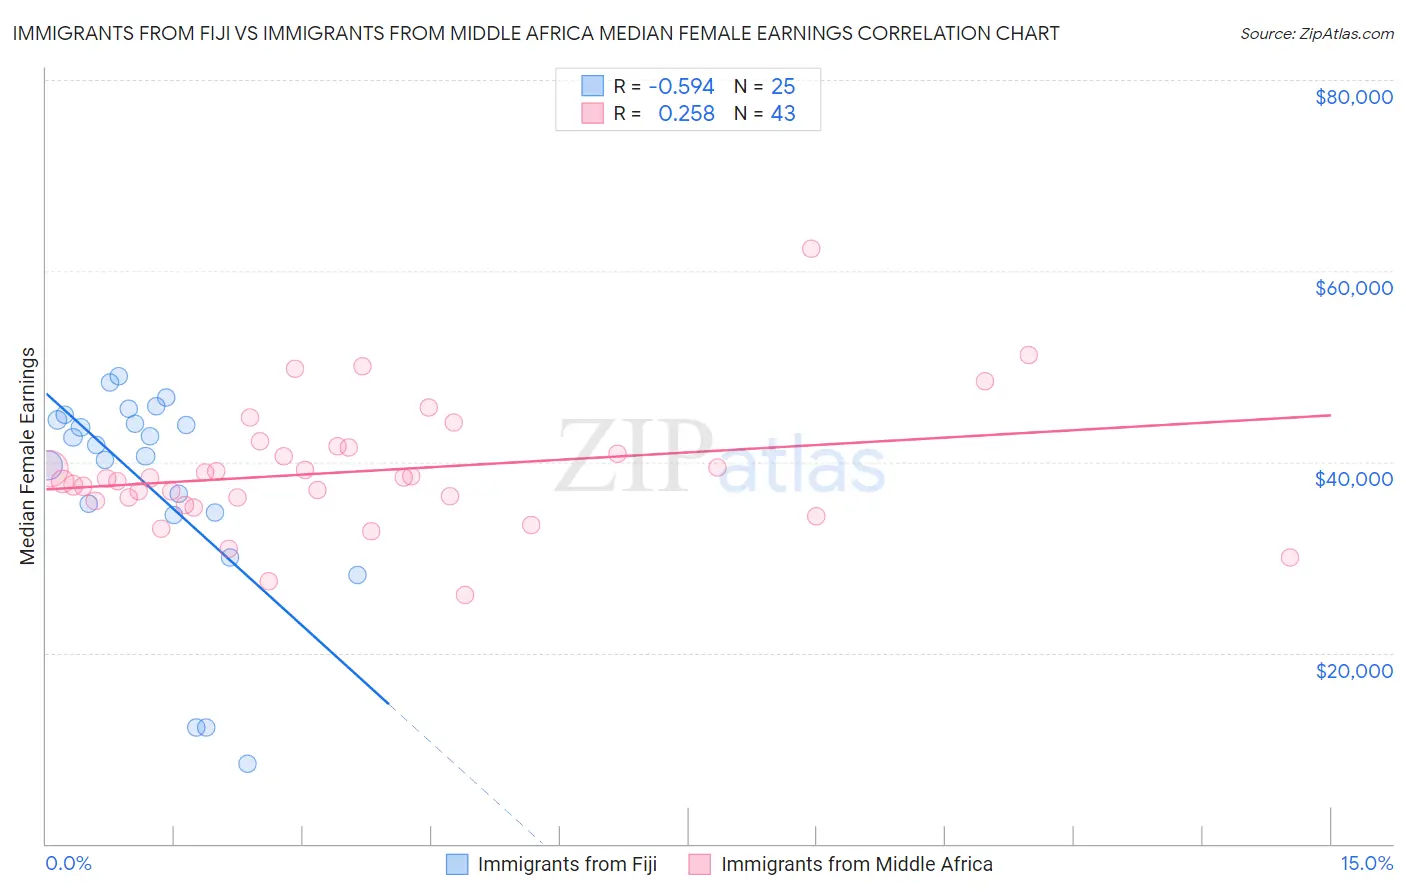 Immigrants from Fiji vs Immigrants from Middle Africa Median Female Earnings